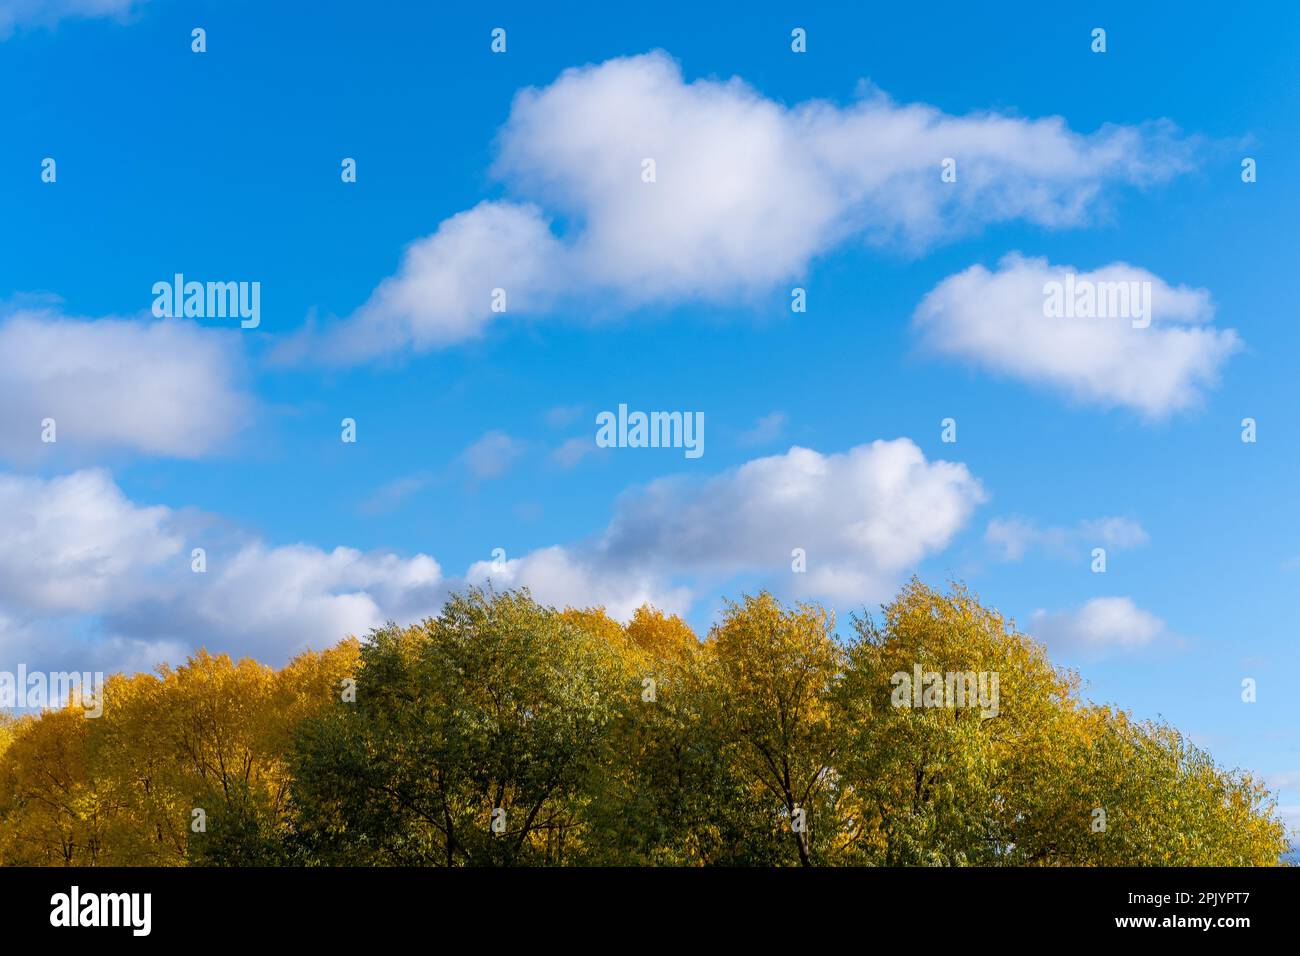 The crown of a tree against a bright blue sky with fluffy clouds. Yellow-green tree leaves and blue sky. Early autumn. Natural autumn summer backgroun Stock Photo